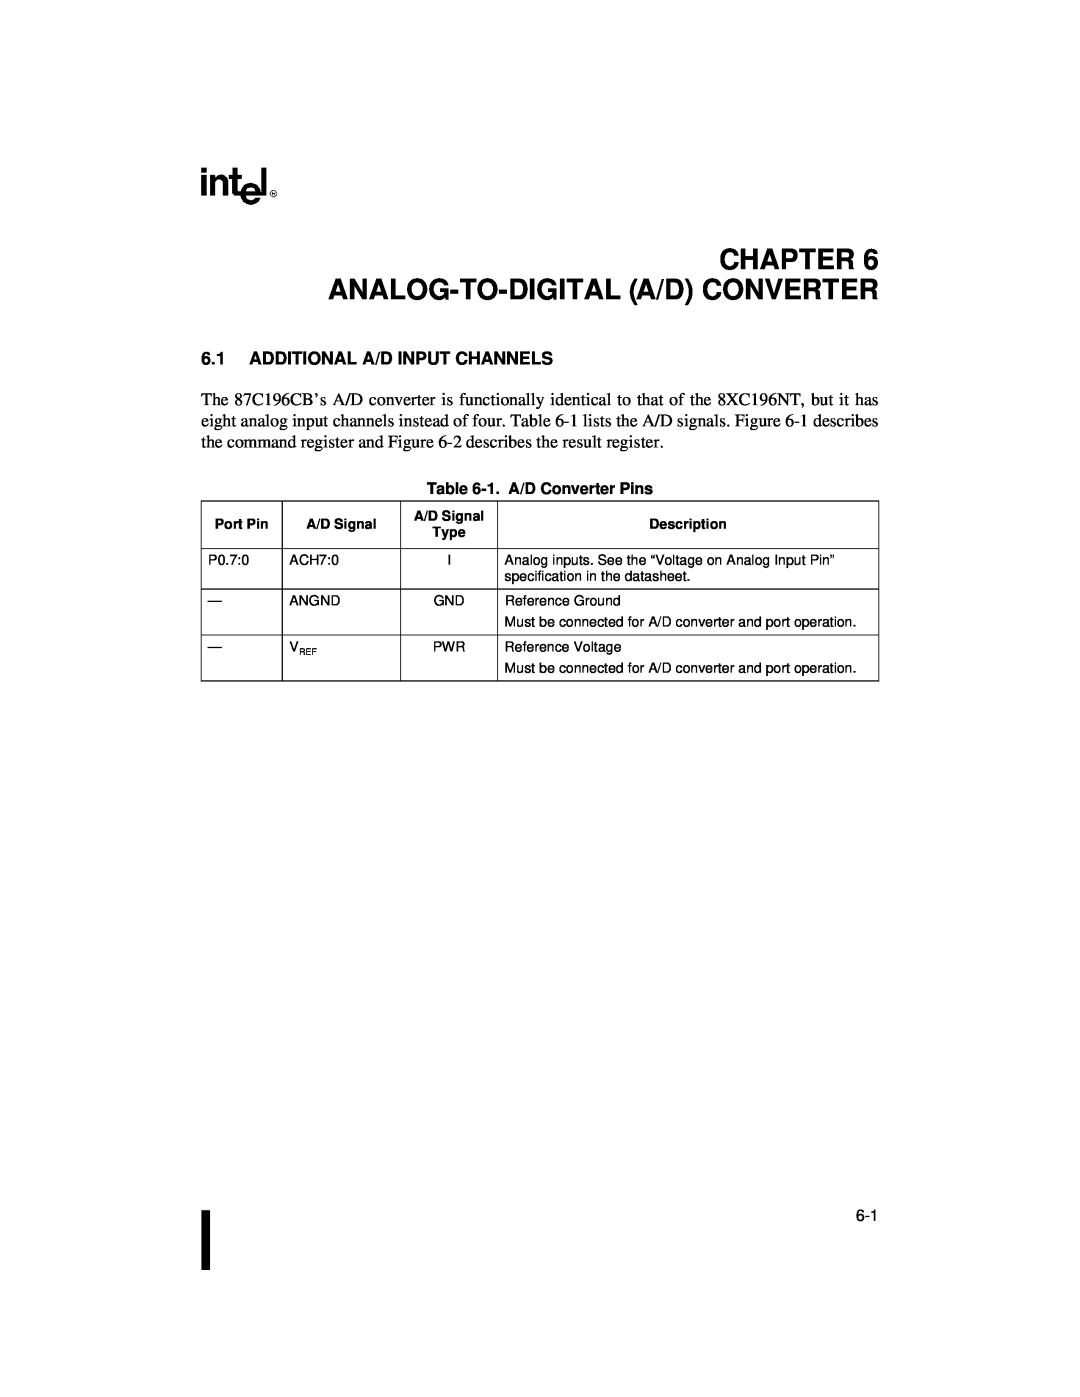 Intel 87C196CB, 8XC196NT user manual Analog-To-Digital A/D Converter, Additional A/D Input Channels 